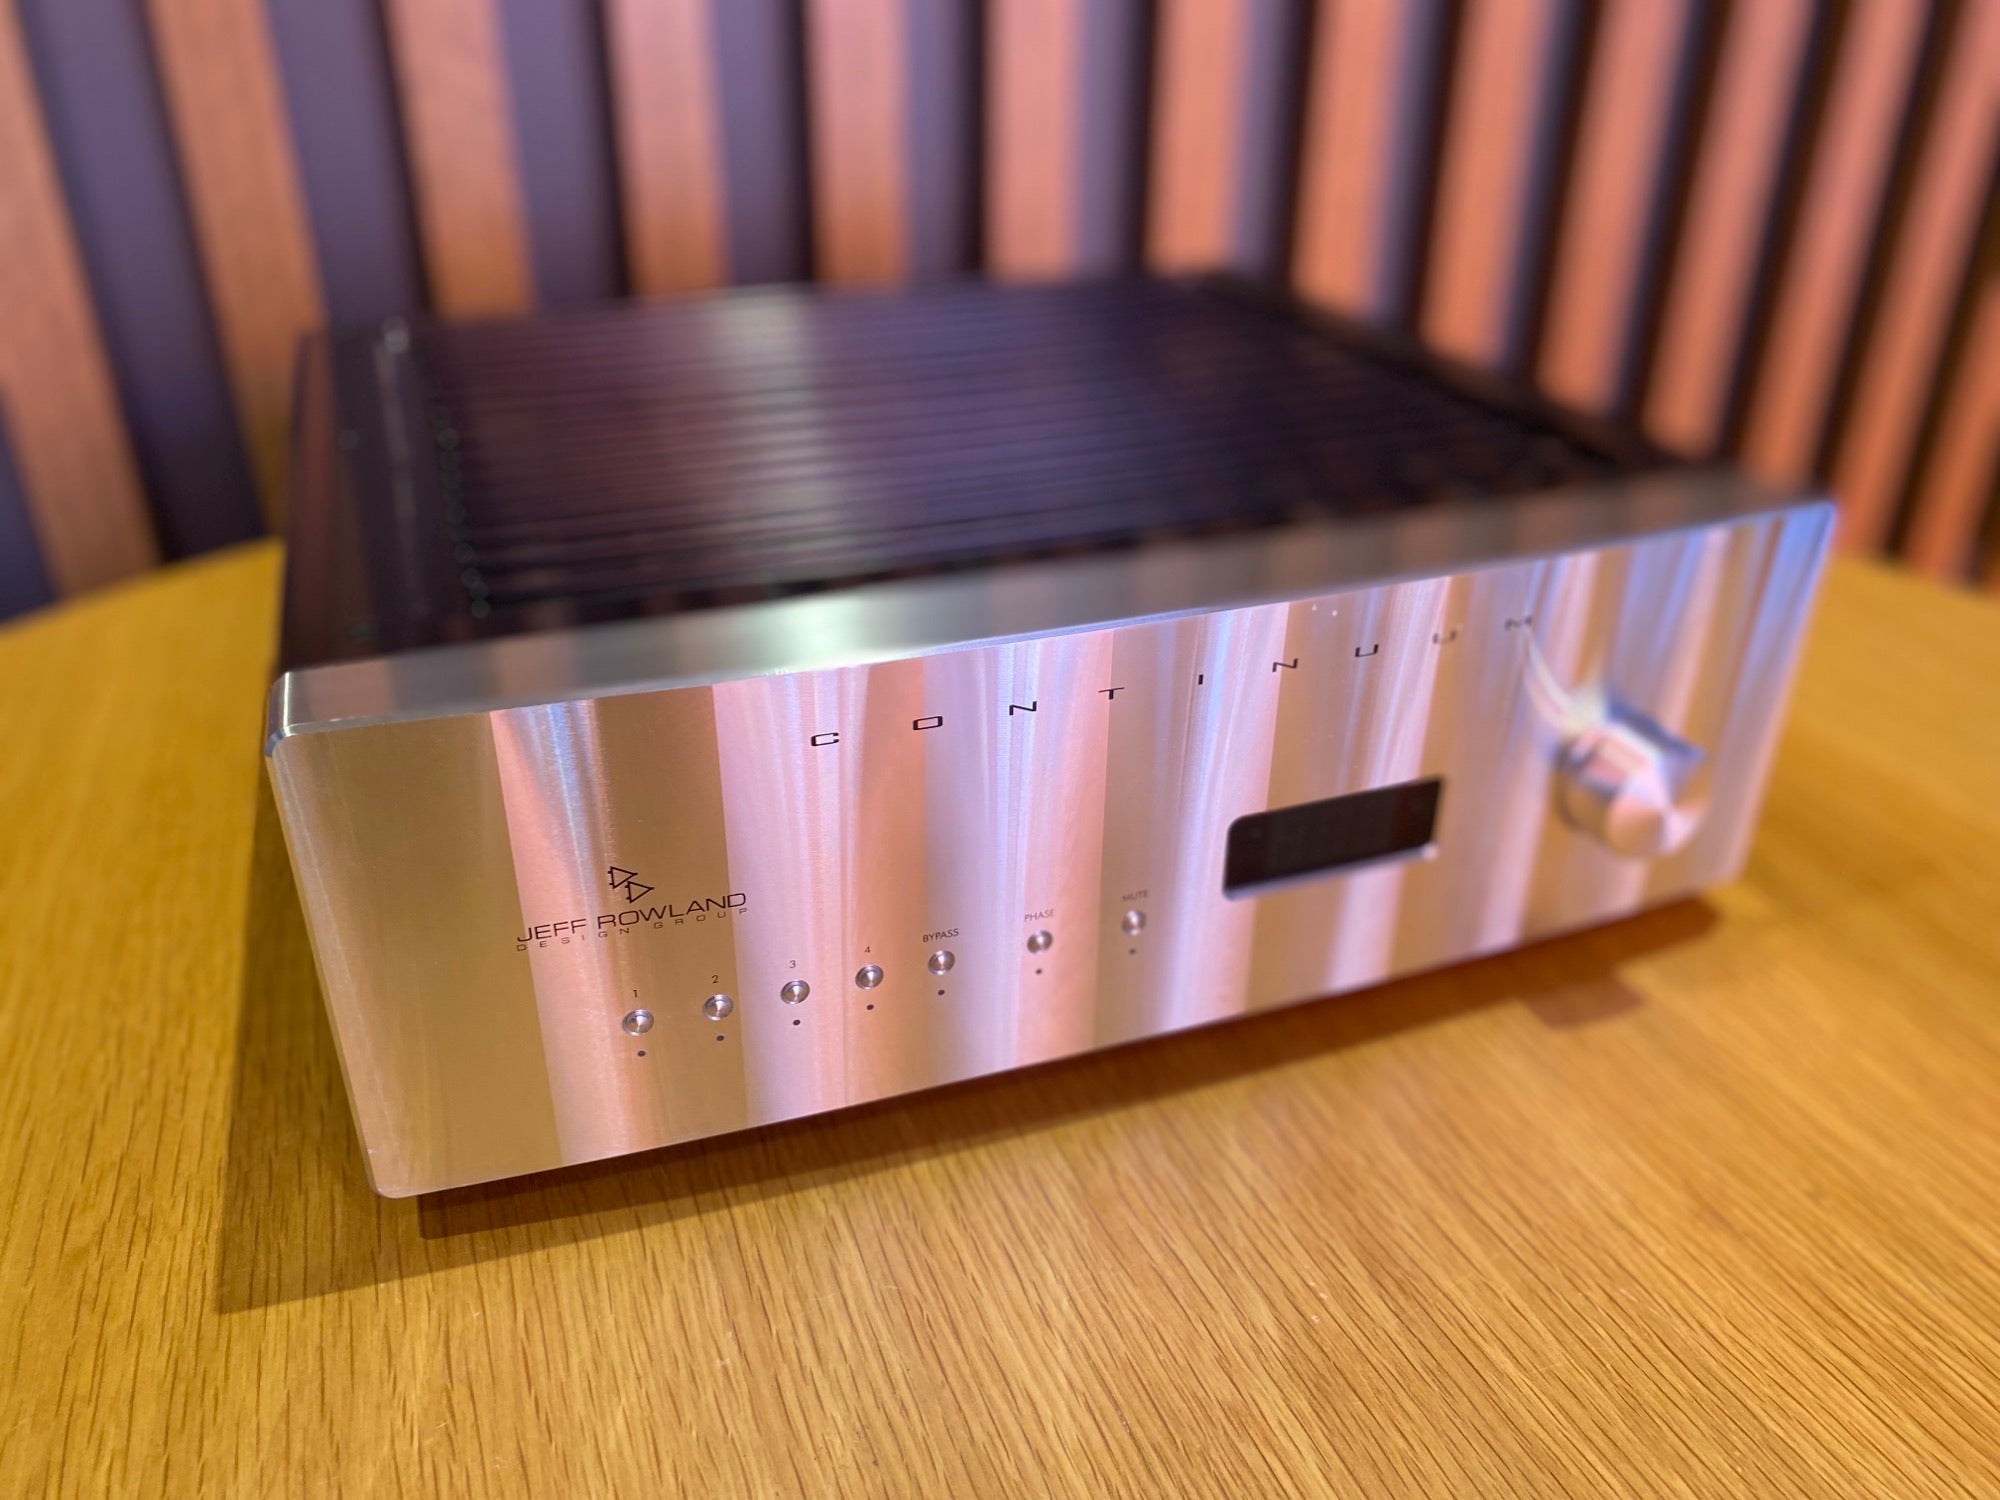 Jeff Rowland Continuum S2 Integrated Amplifier with DAC - Consignment